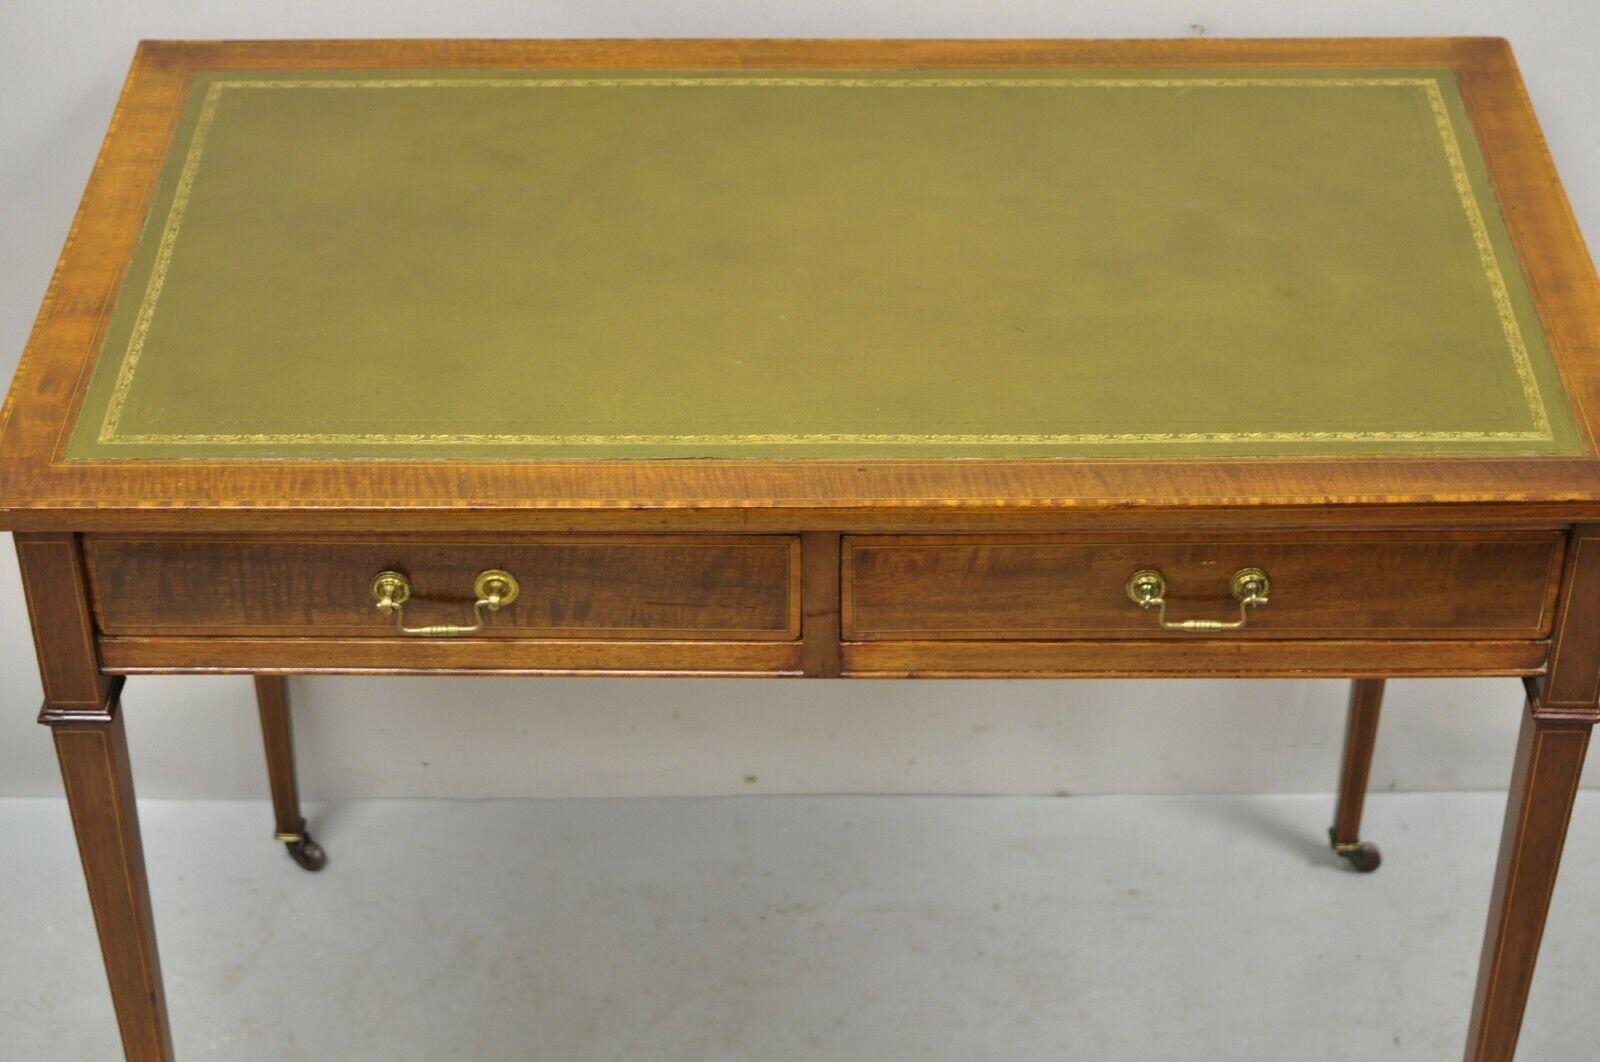 Antique English Edwardian green tooled leather top 2 drawer ladies writing desk. Item features a nice smaller size, green tooled leather gold gilt top, banding and pencil inlay throughout, rolling casters, beautiful wood grain, finished back, 2